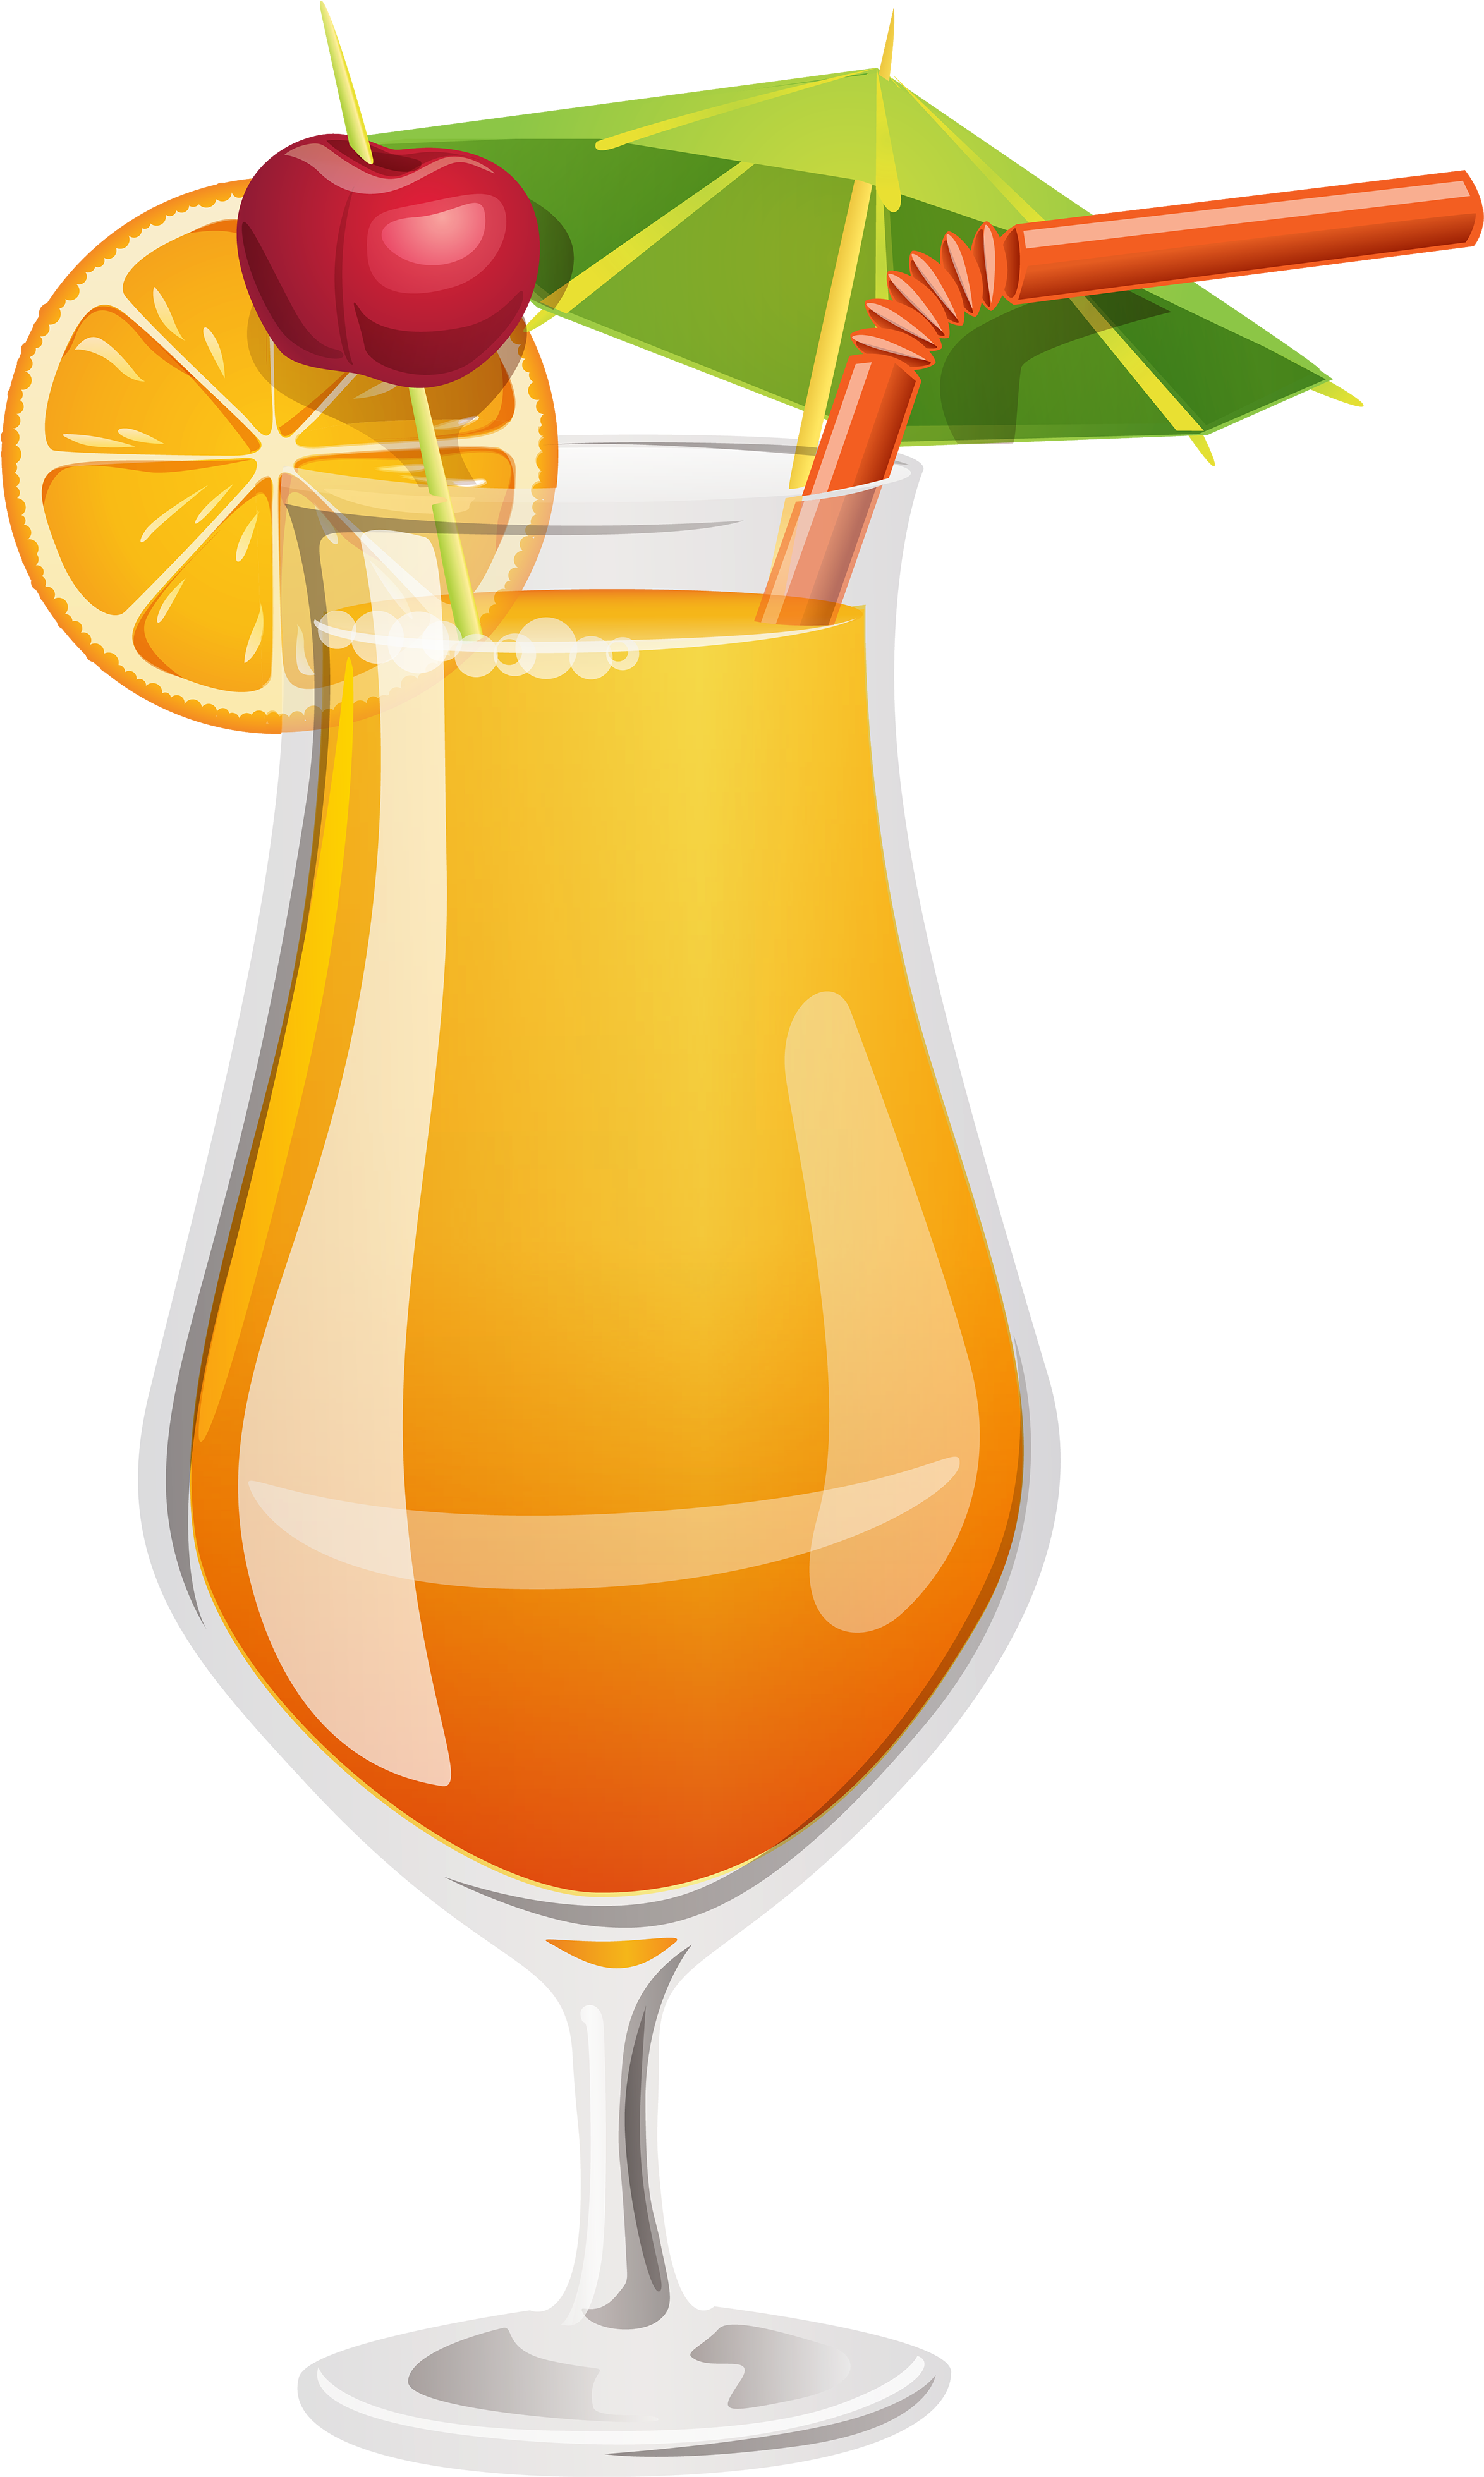 Tequila Sunrise Transparent Free PNG